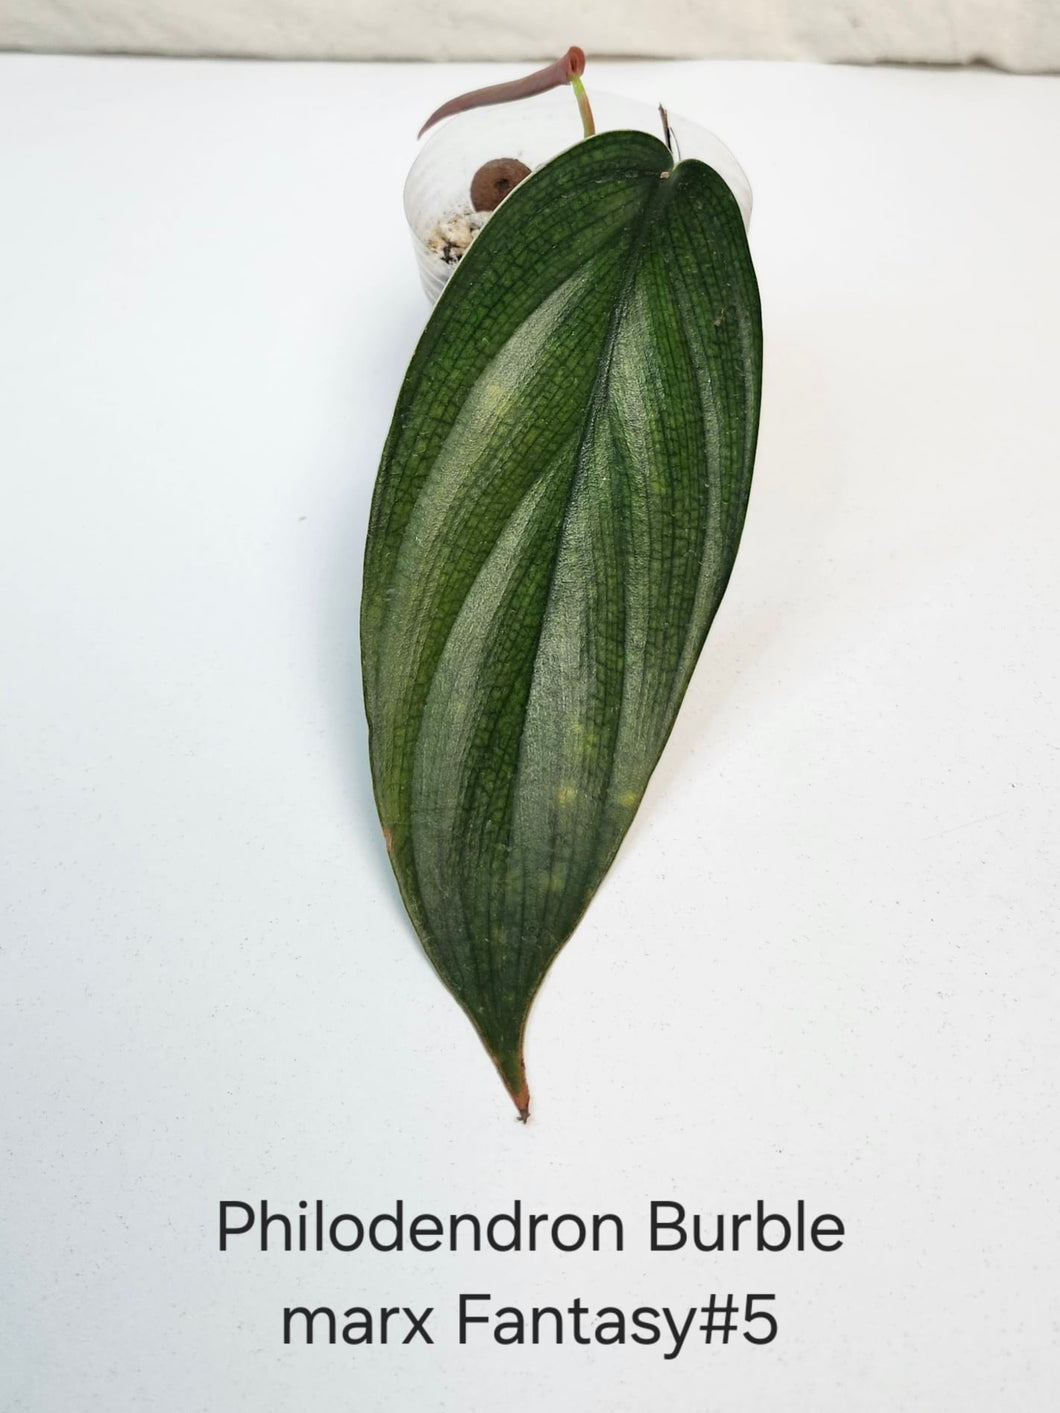 Philodendron burble marx fantasy #5